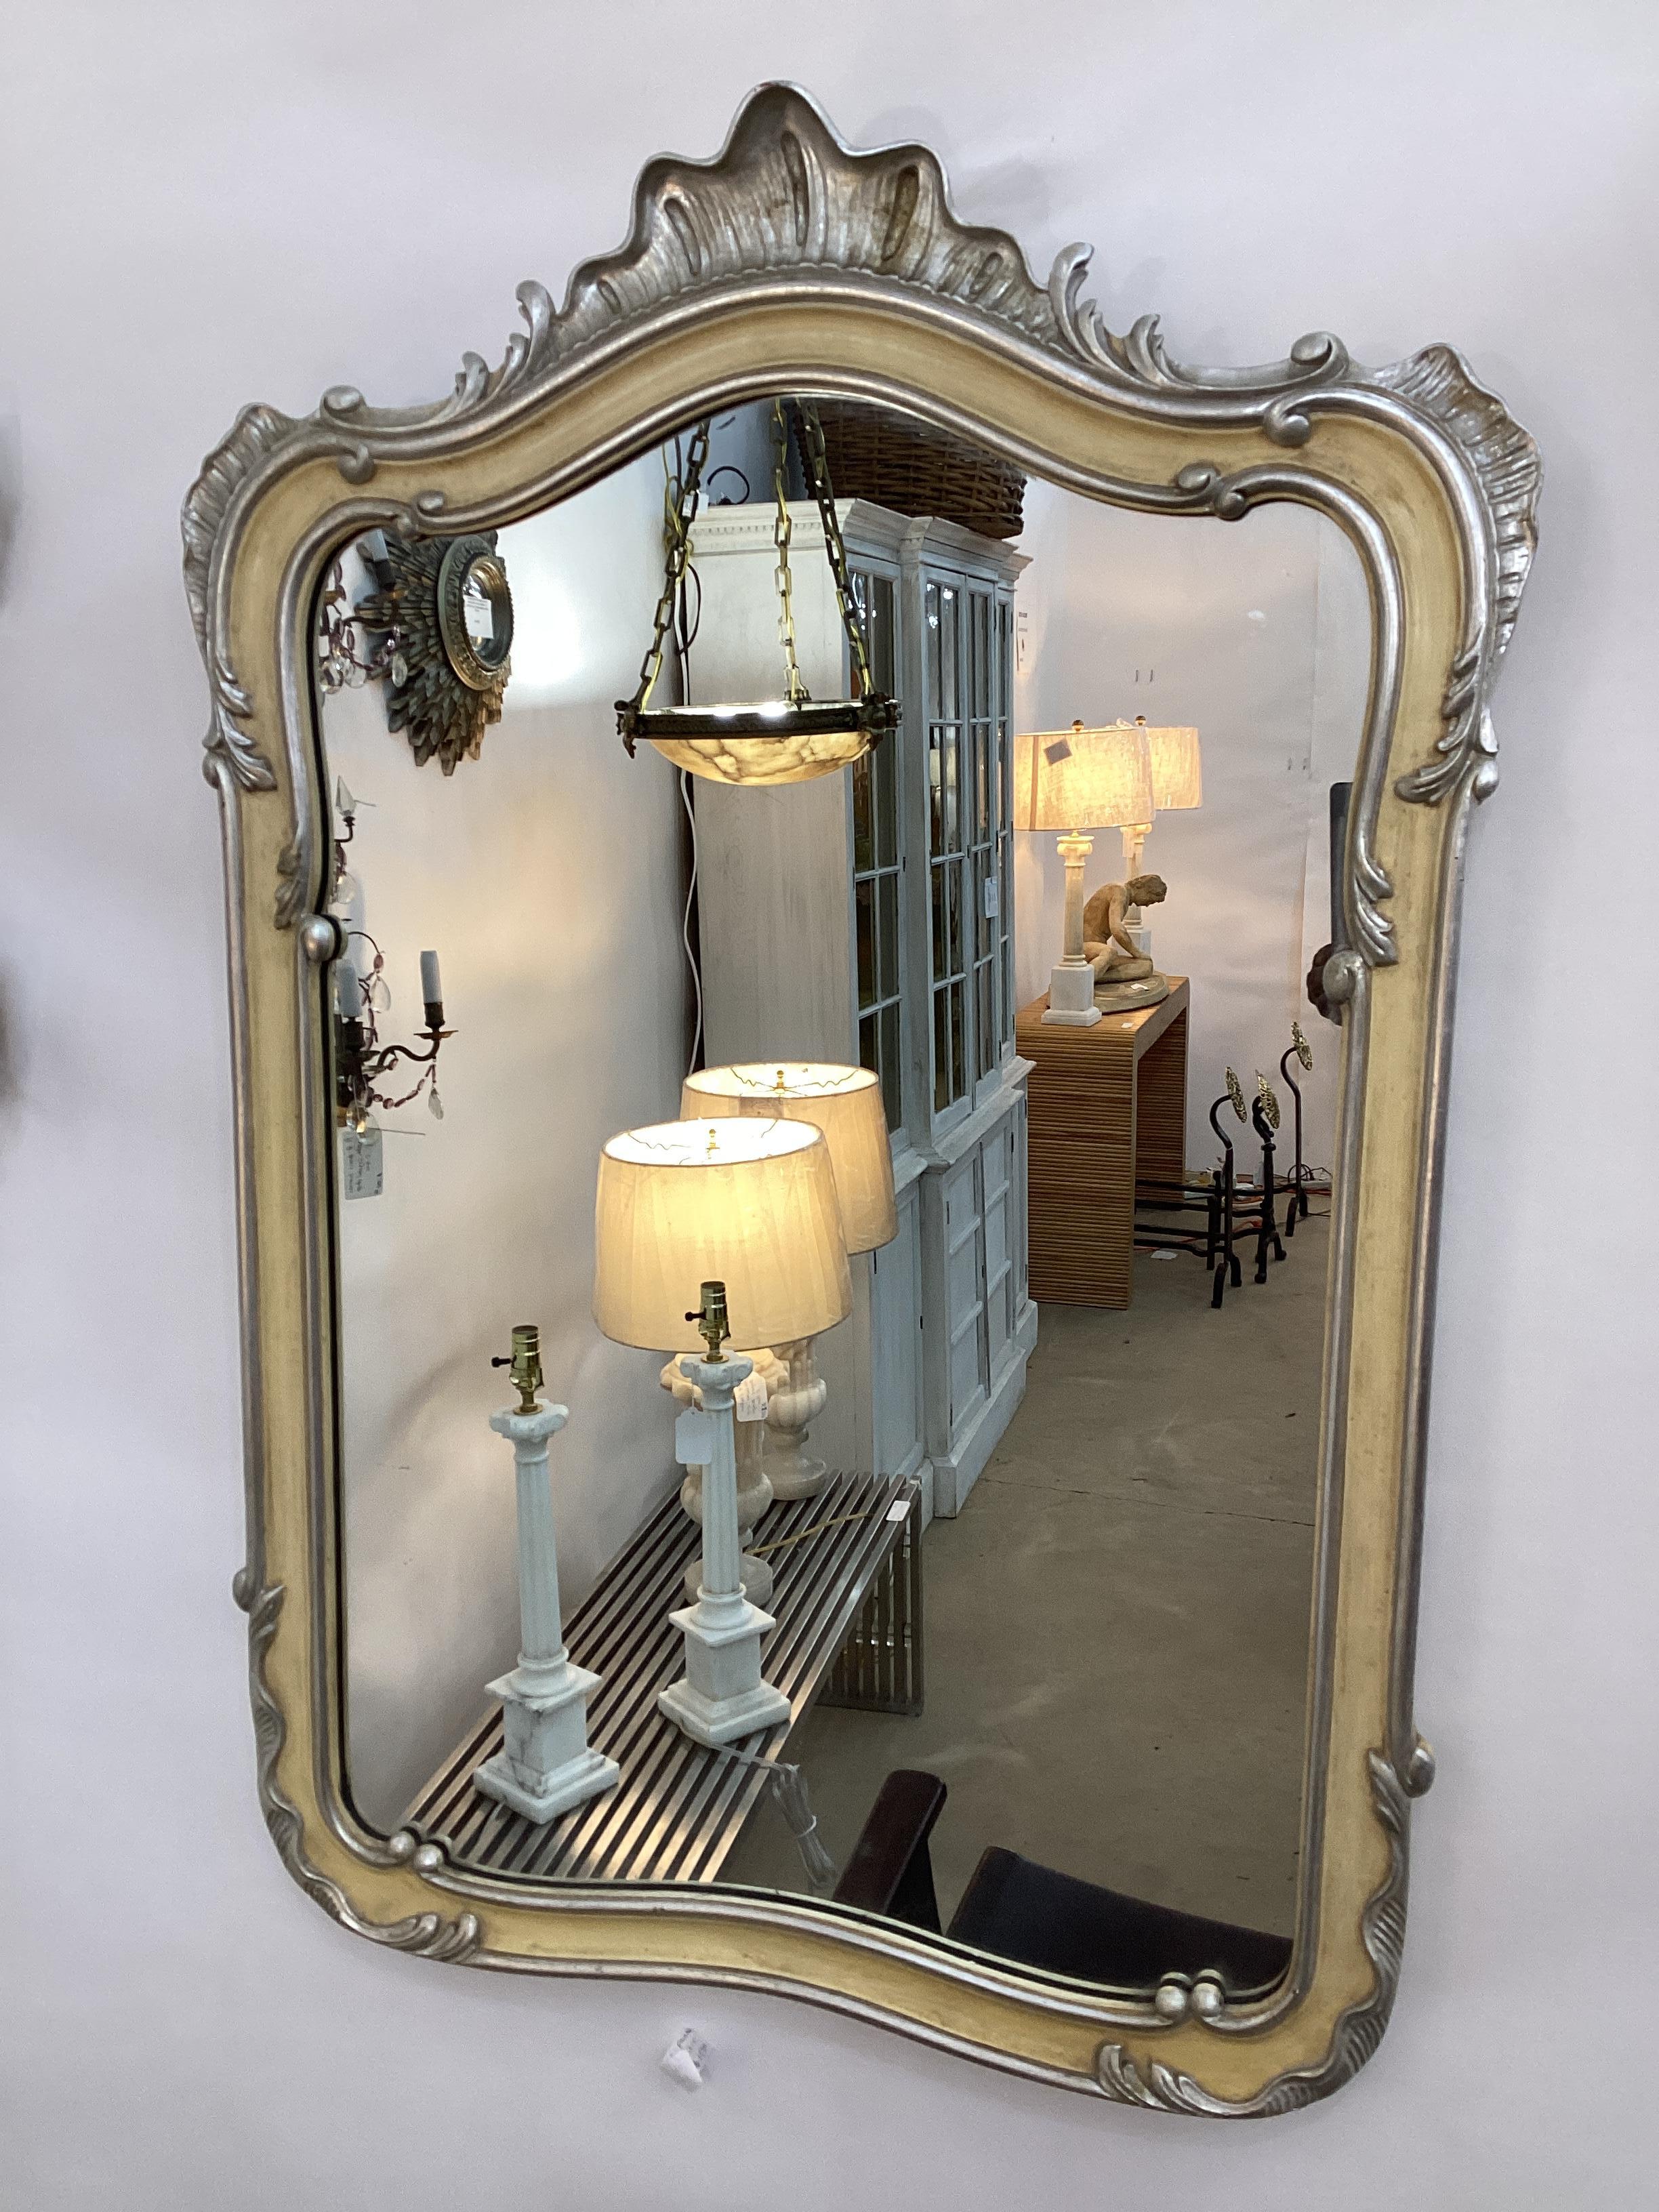 Vintage John Widdicomb French Style Silver Leaf and Painted Mirror. Cream painted frame with silver leaf accents in the Louis XV style. Retains original John Widdicomb plaque on the back of mirror. In very good food vintage condition.